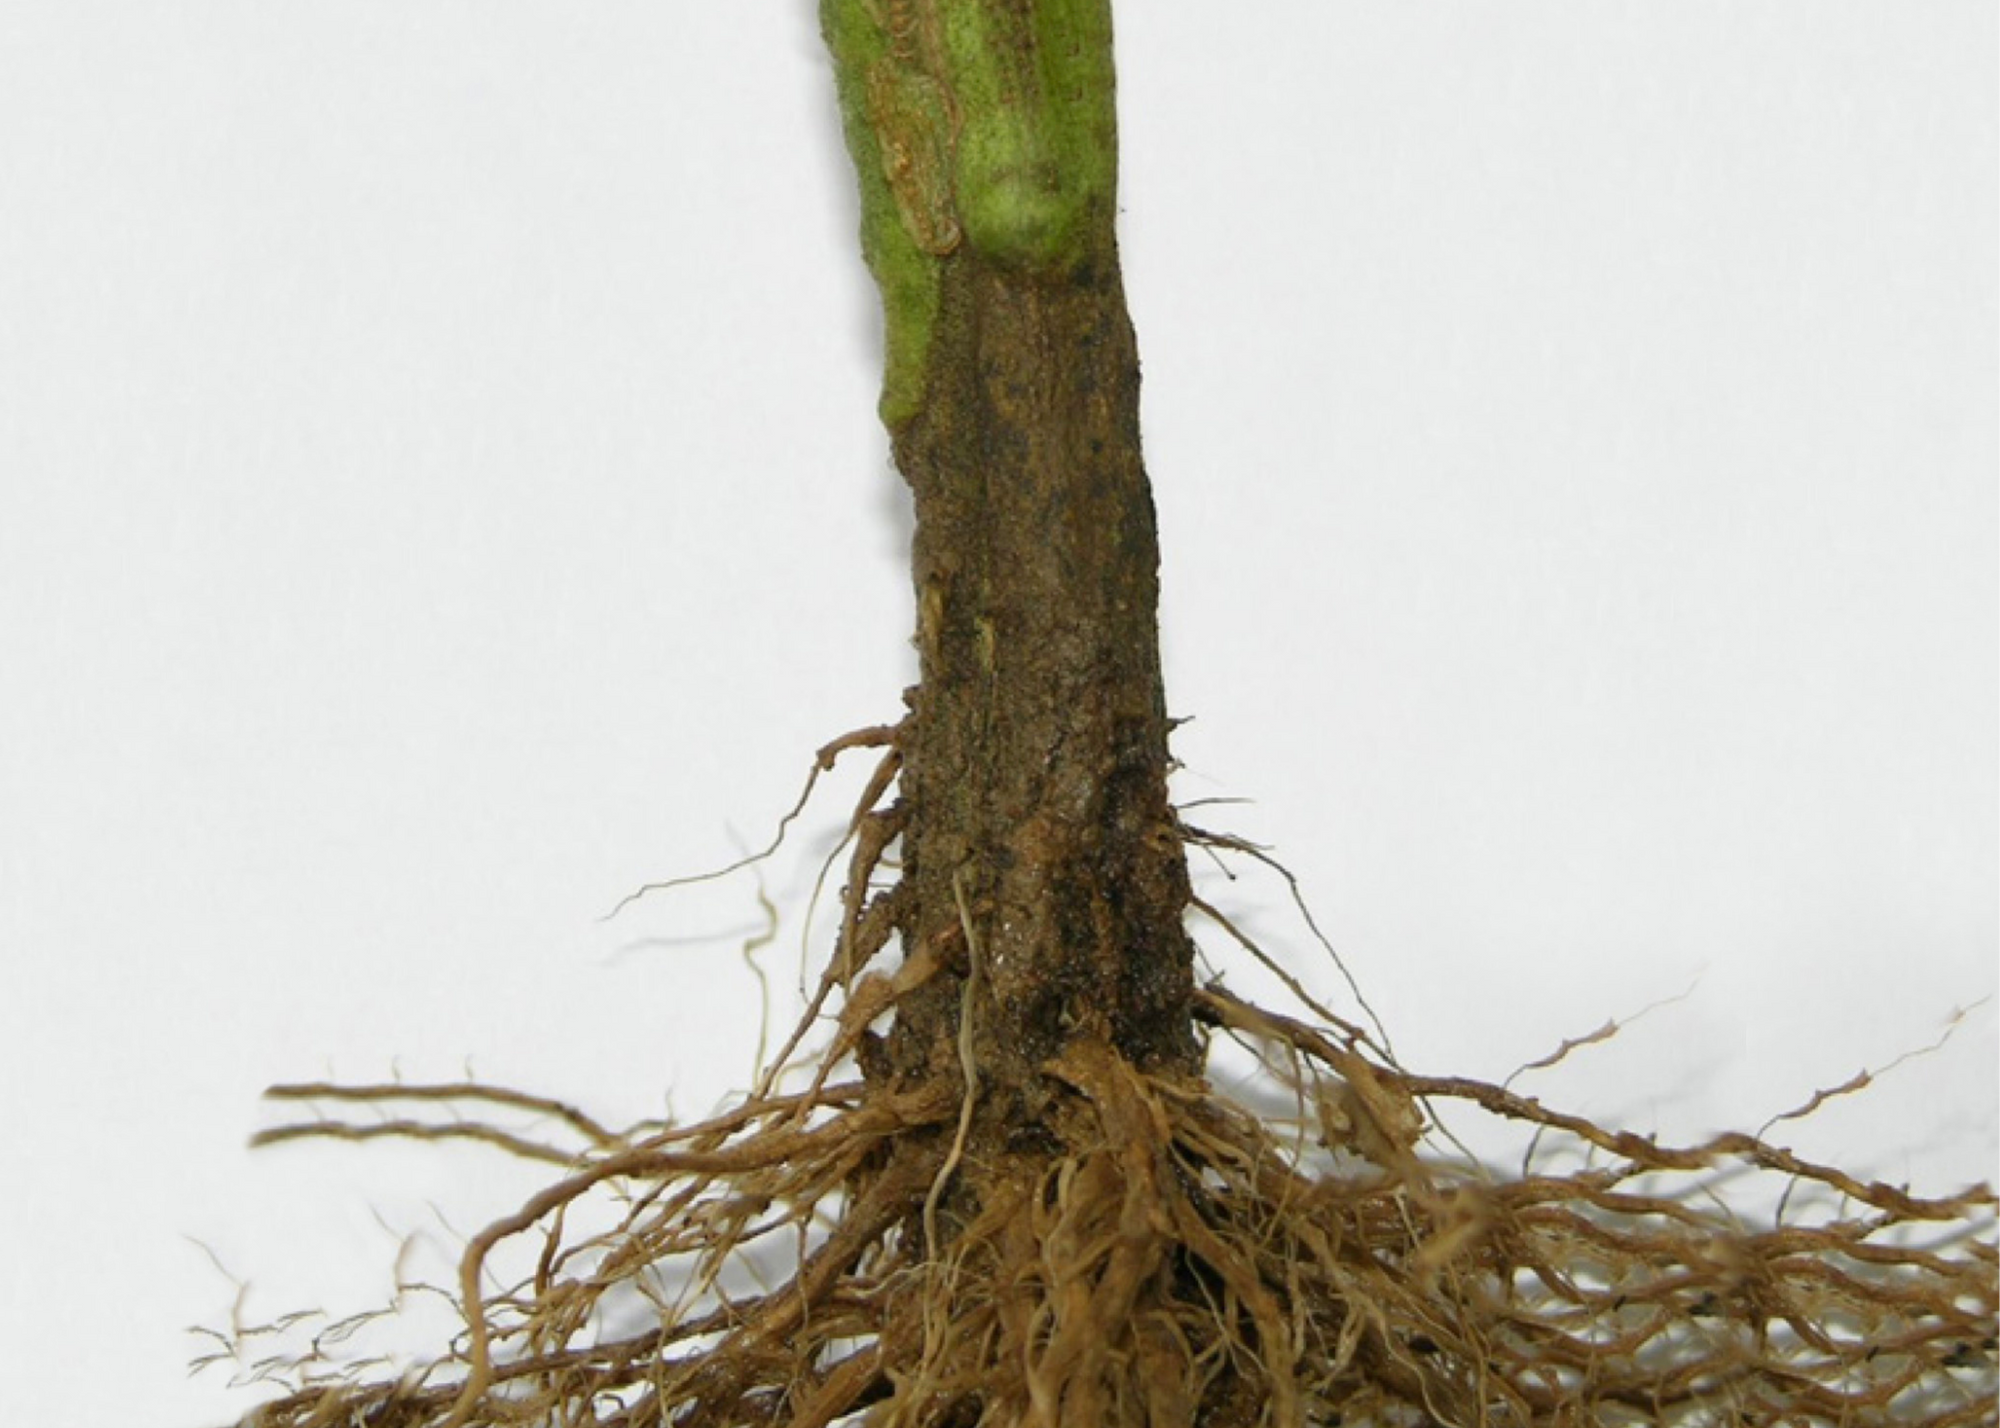 Stem with brown rot.